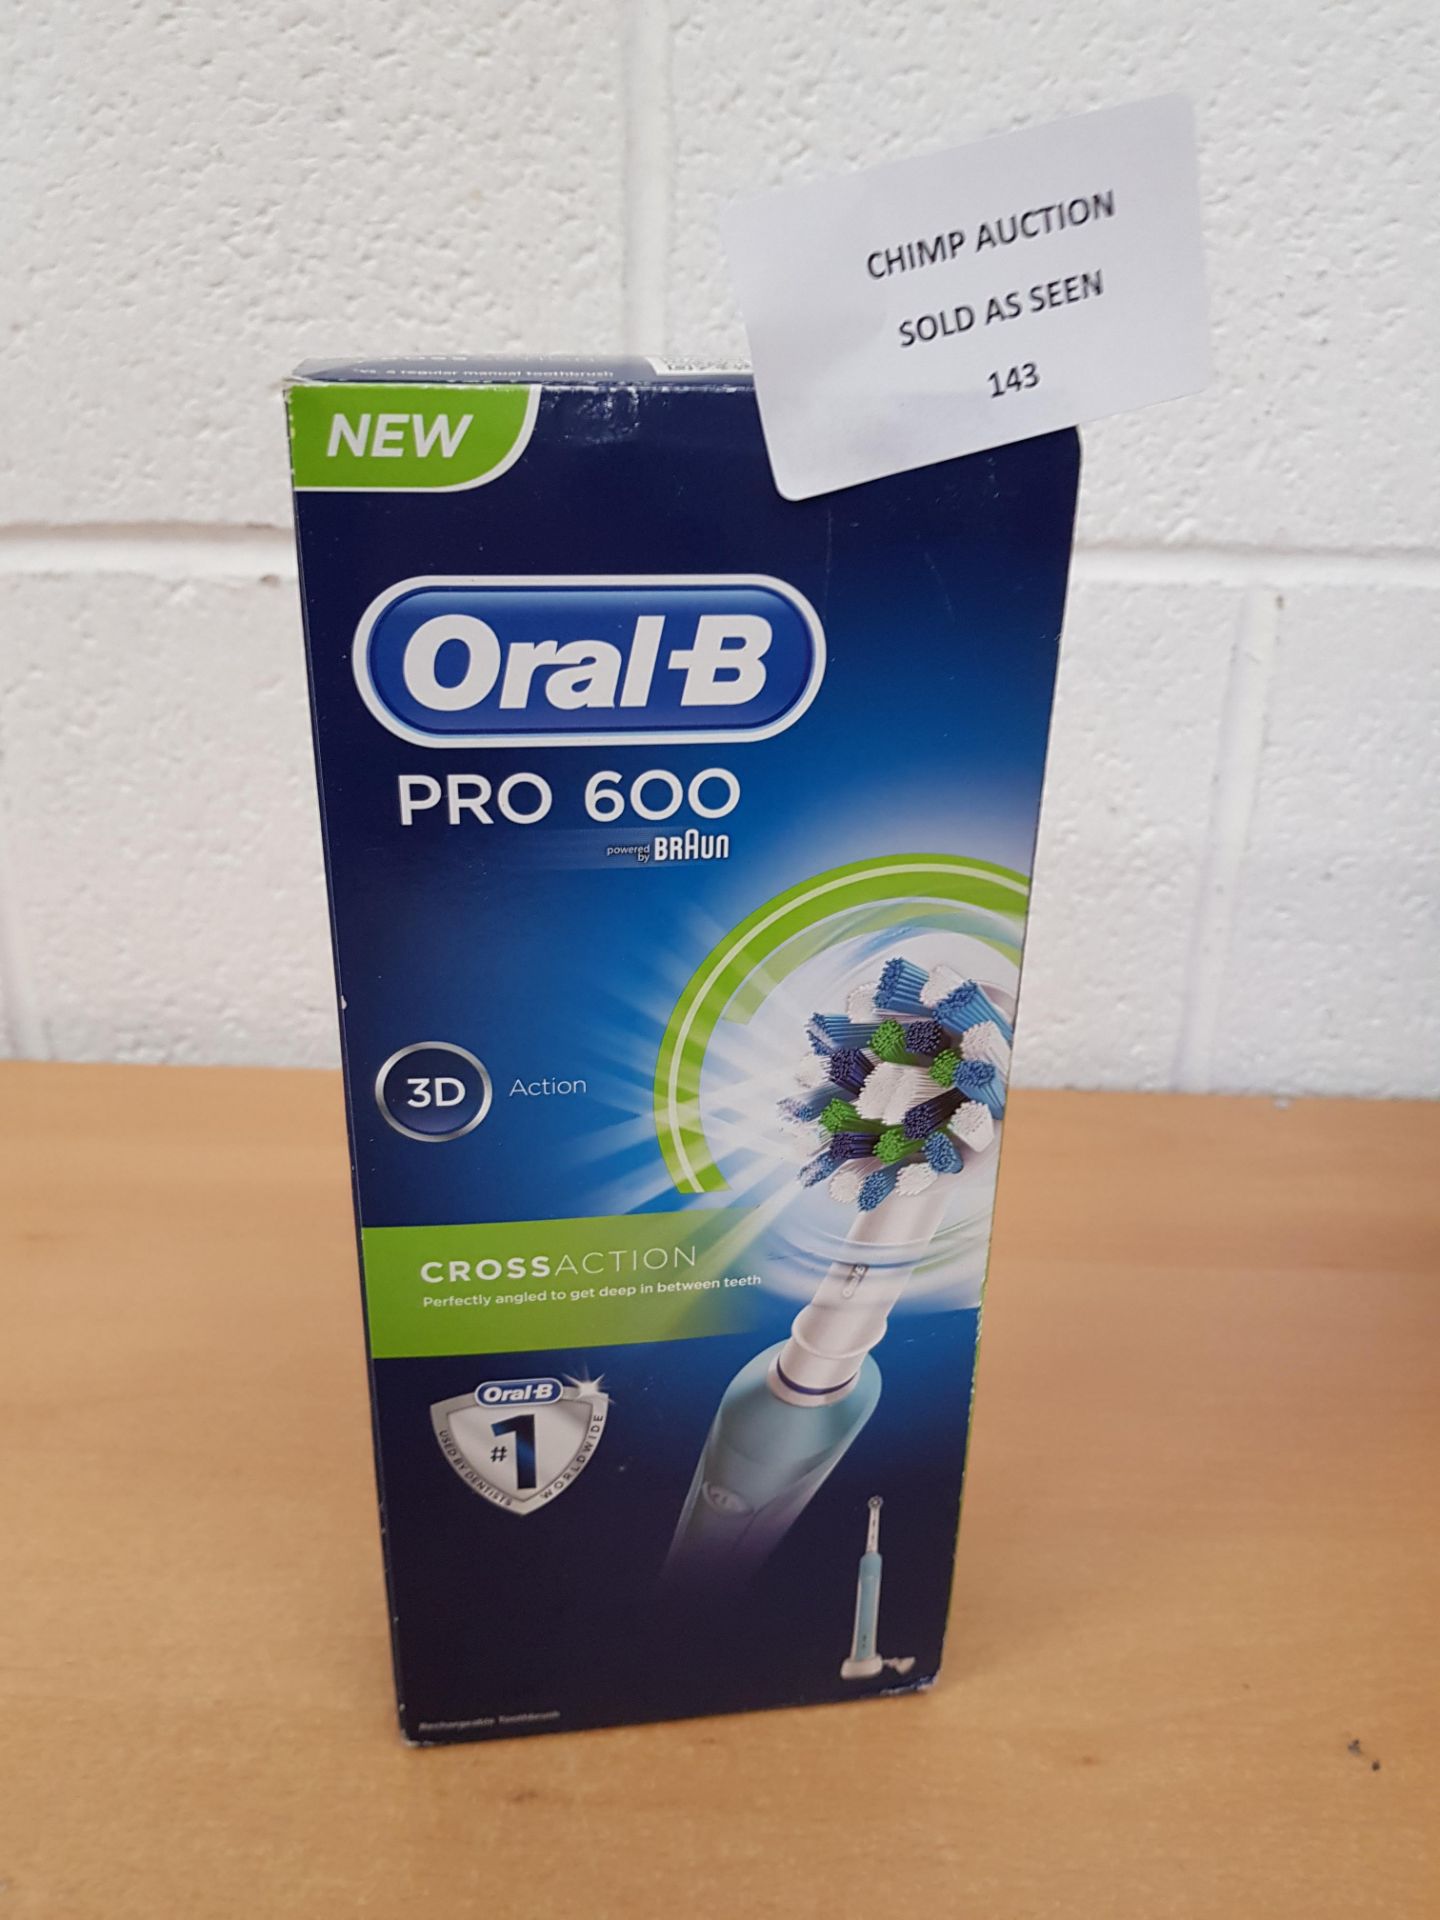 Oral-B Pro 600 electric 3D Action toothbrush